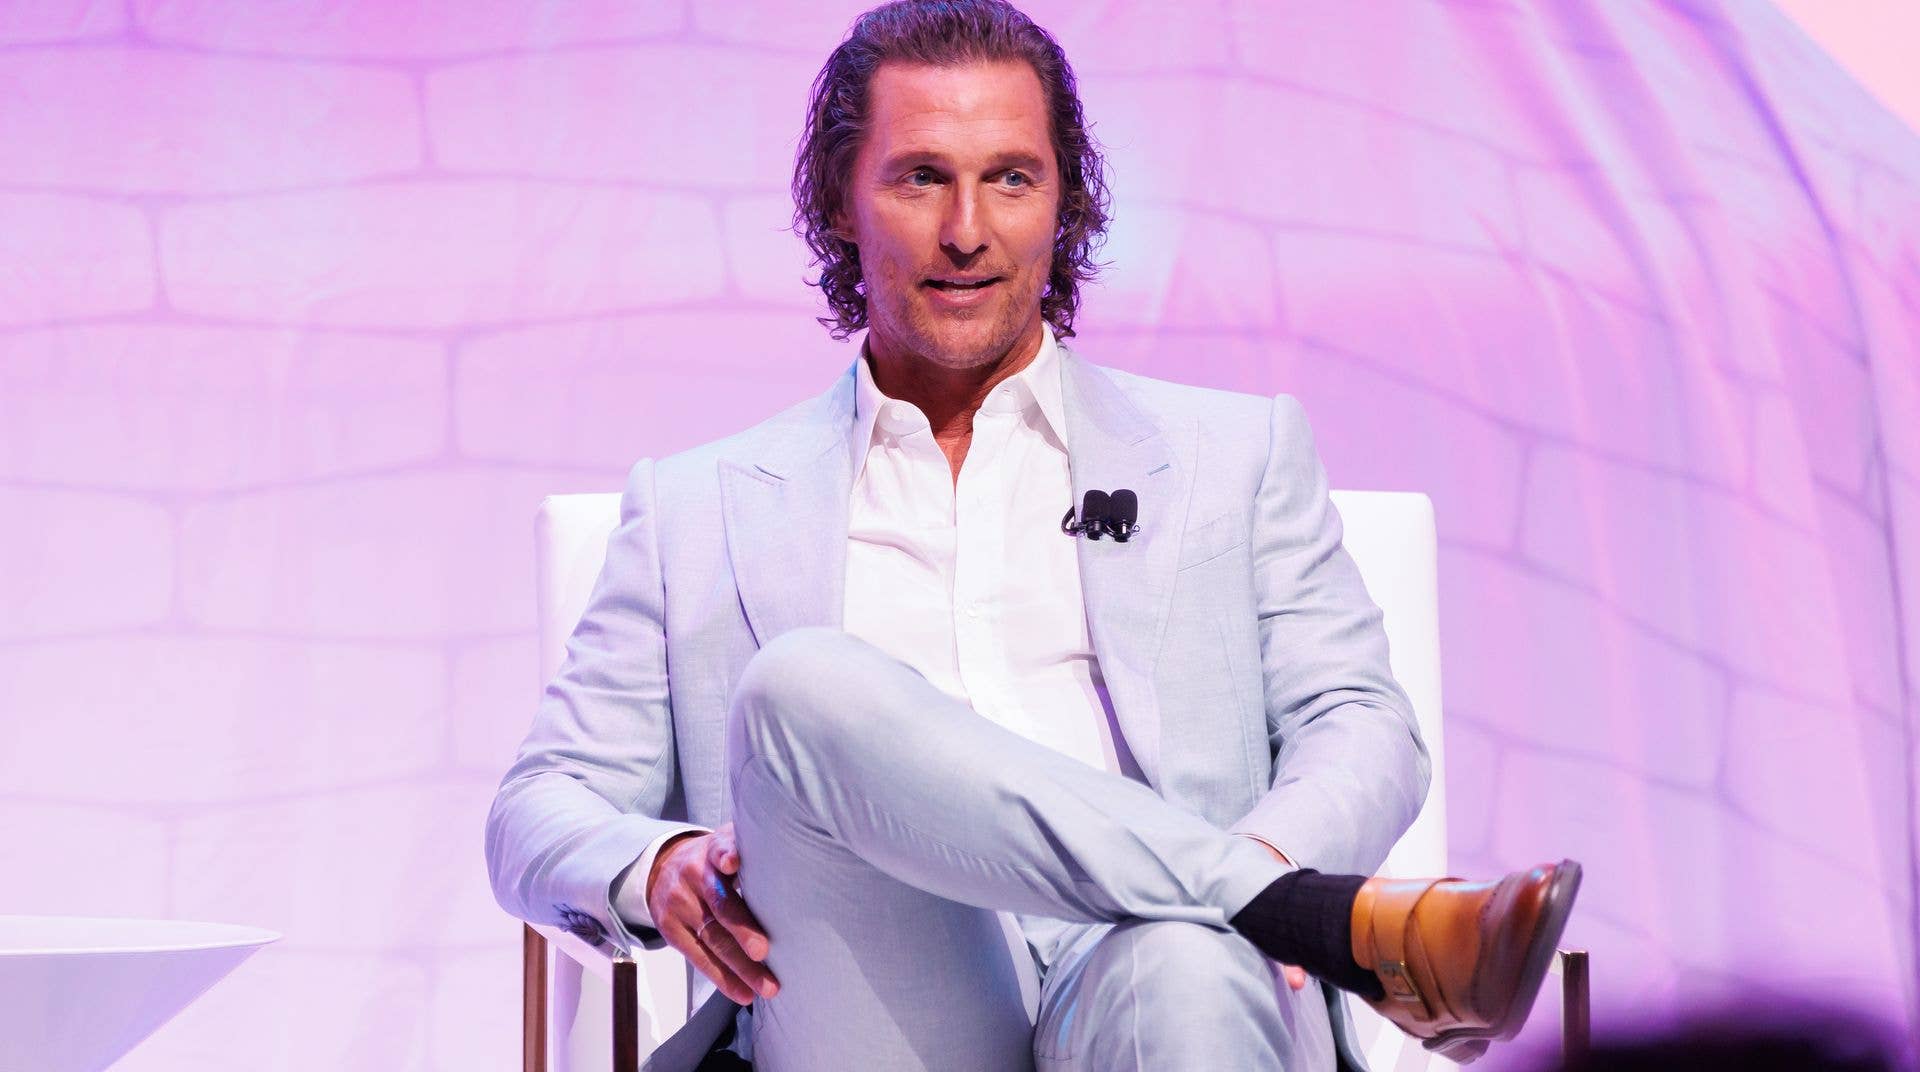 Matthew McConaughey speaks on stage at the Lincoln Centennial Celebration